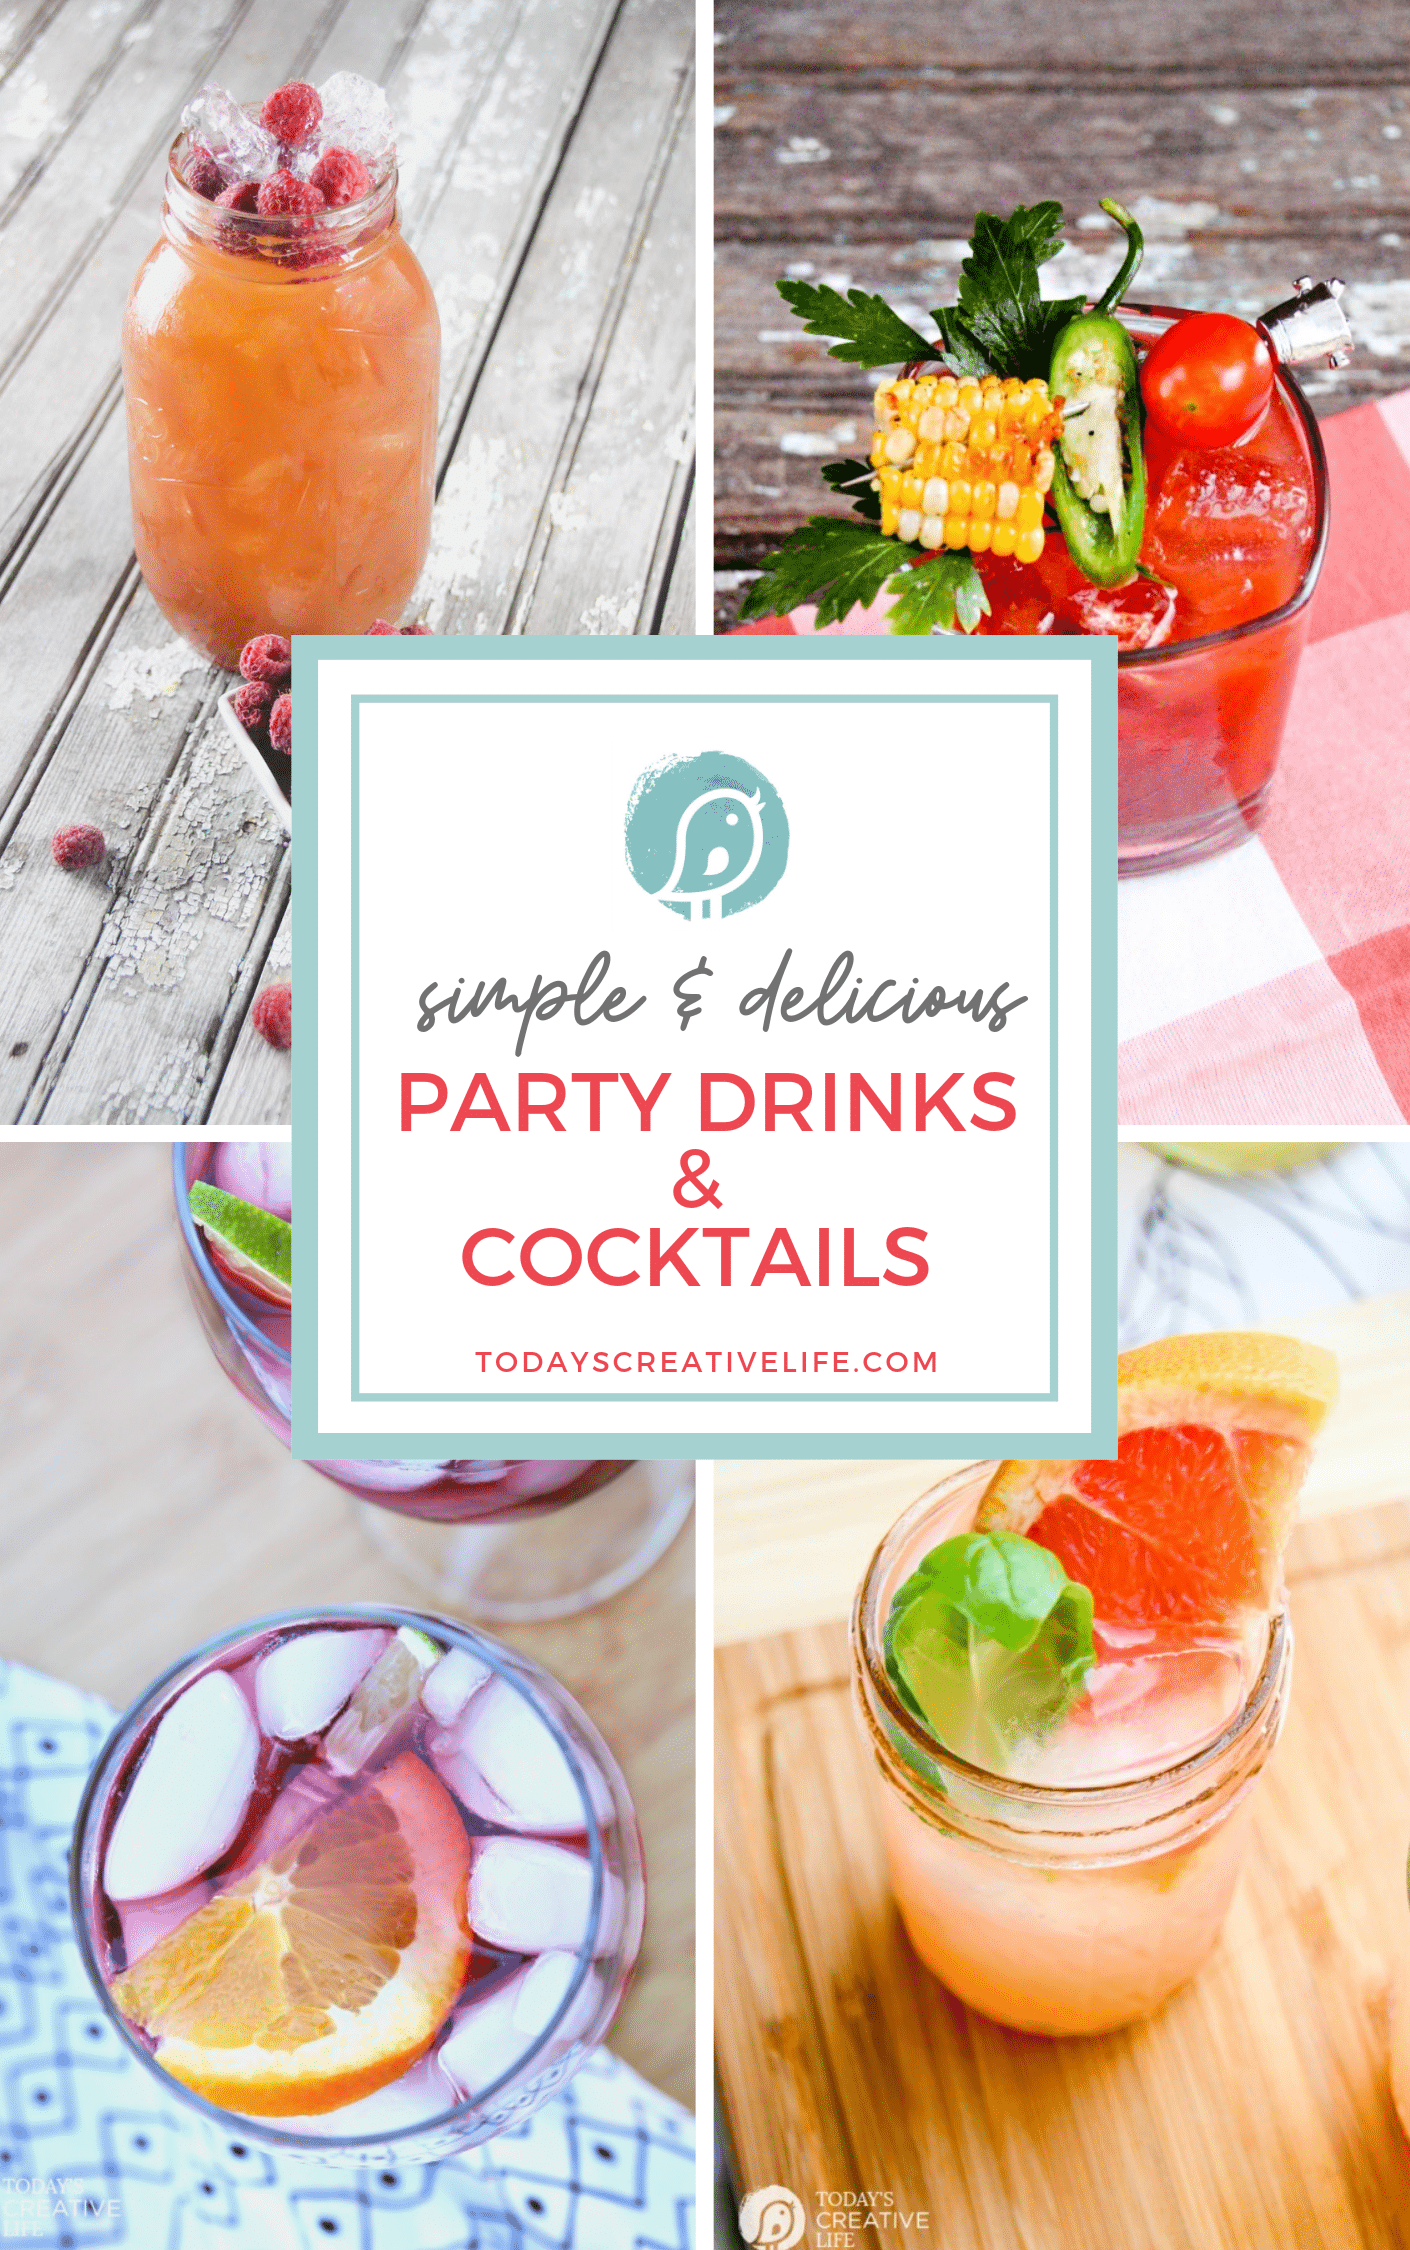 15 Party Drinks and Cocktails